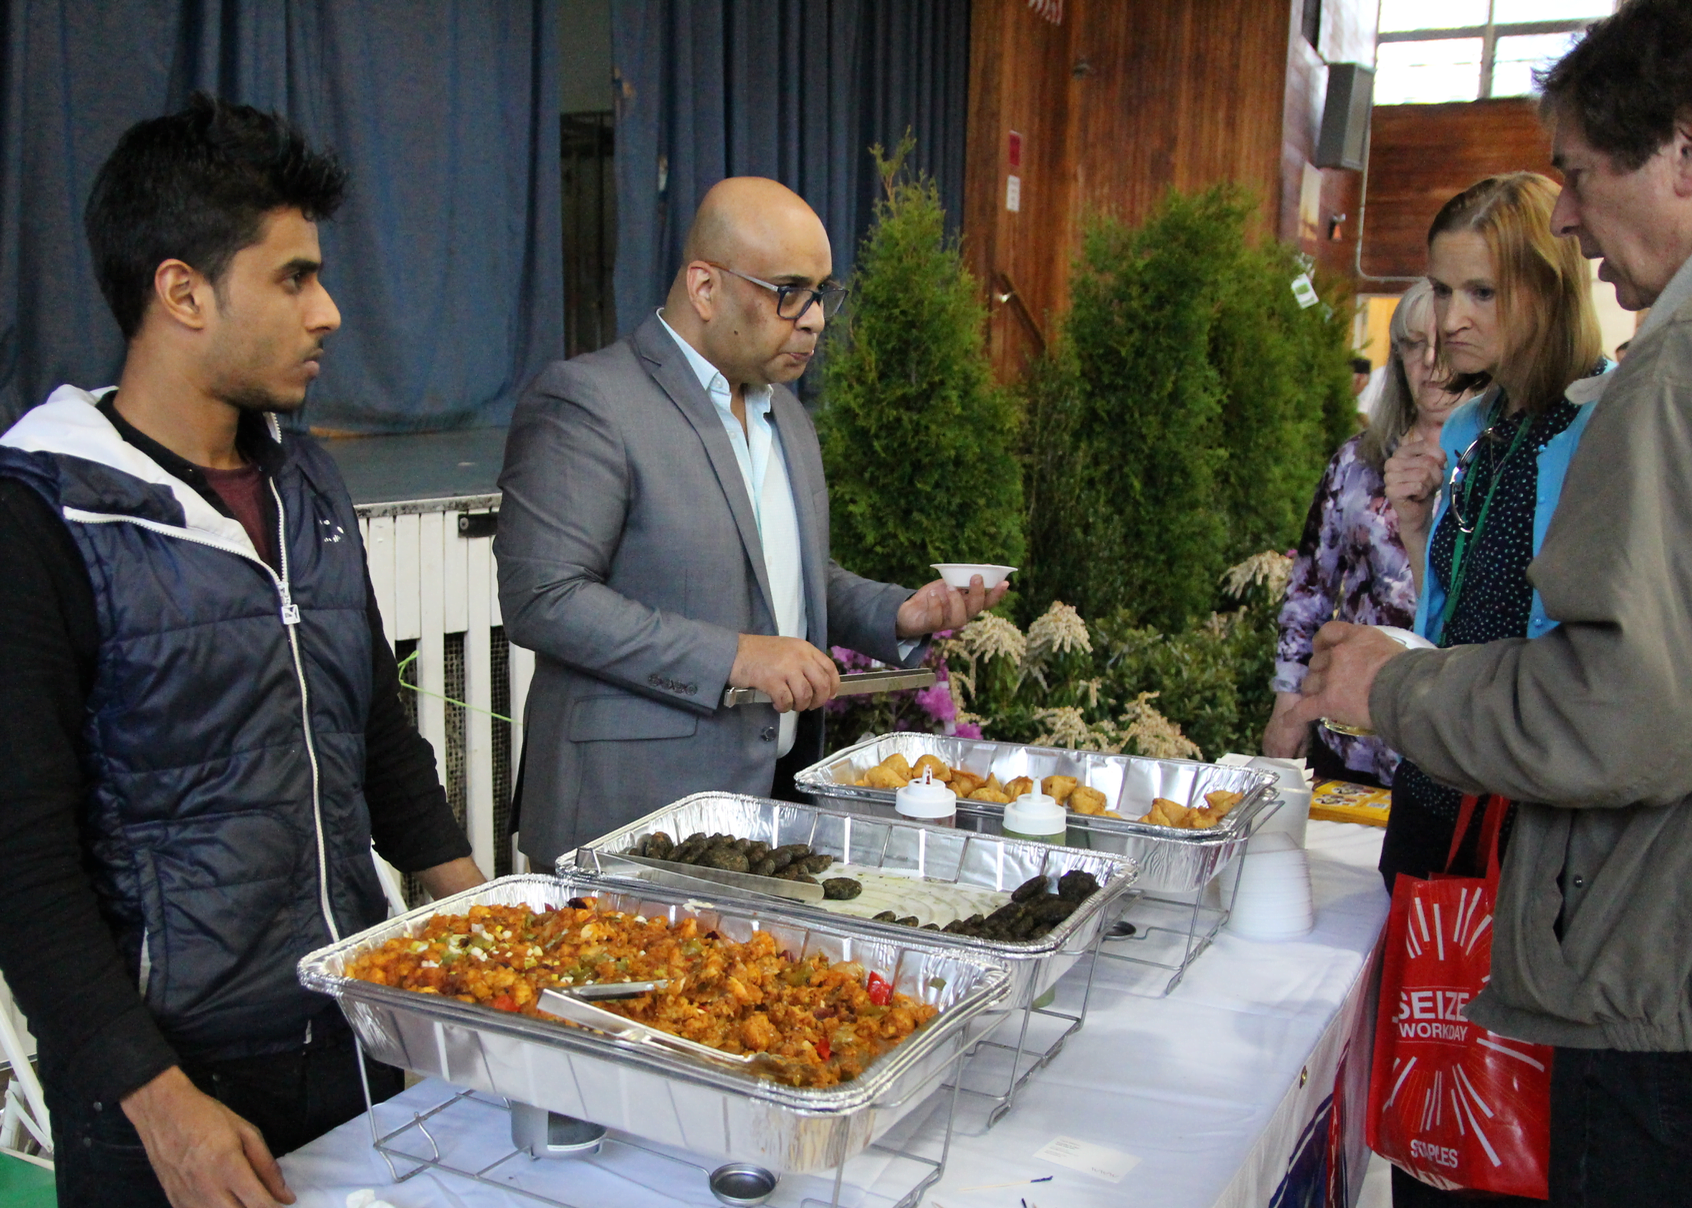 The India Avenue Restaurant sampled their offerings at the Greenwich Chamber of Commerce business showcase on April 26, 2018 Photo: Avery Barakett